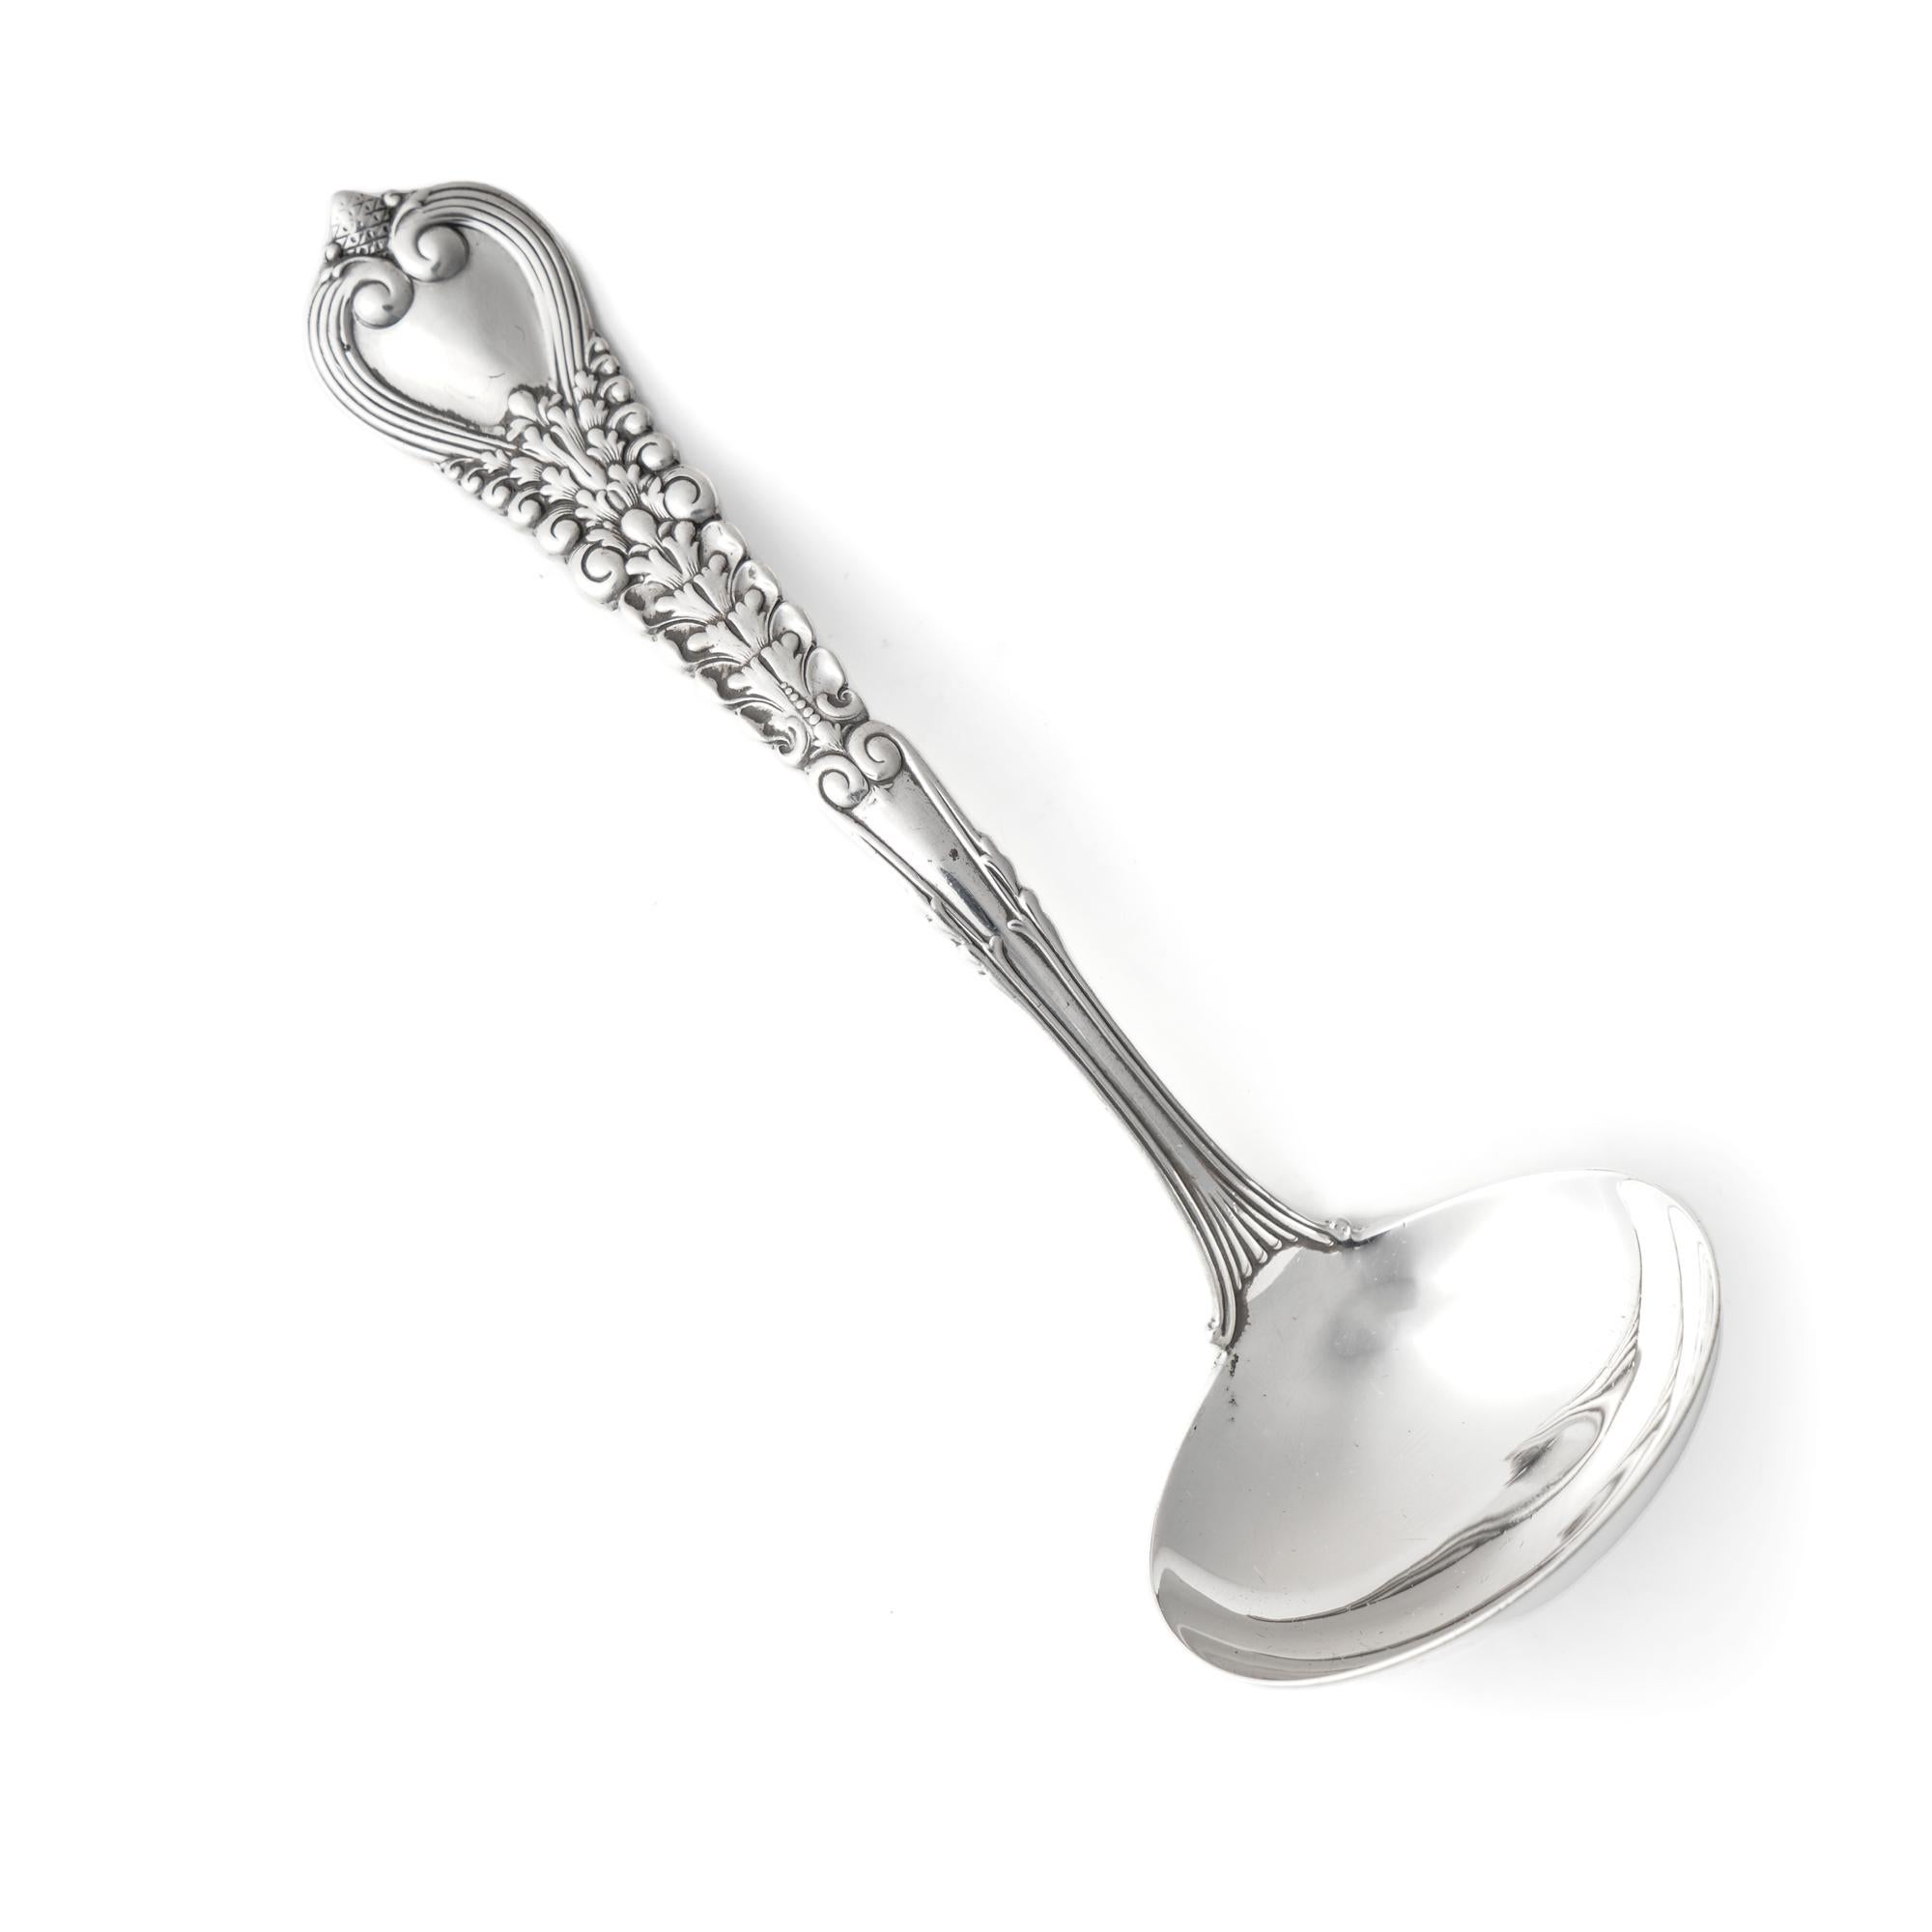 Antique Tiffany & Co. Sterling Silver Florentine Pattern Sauce Ladle For Sale 4